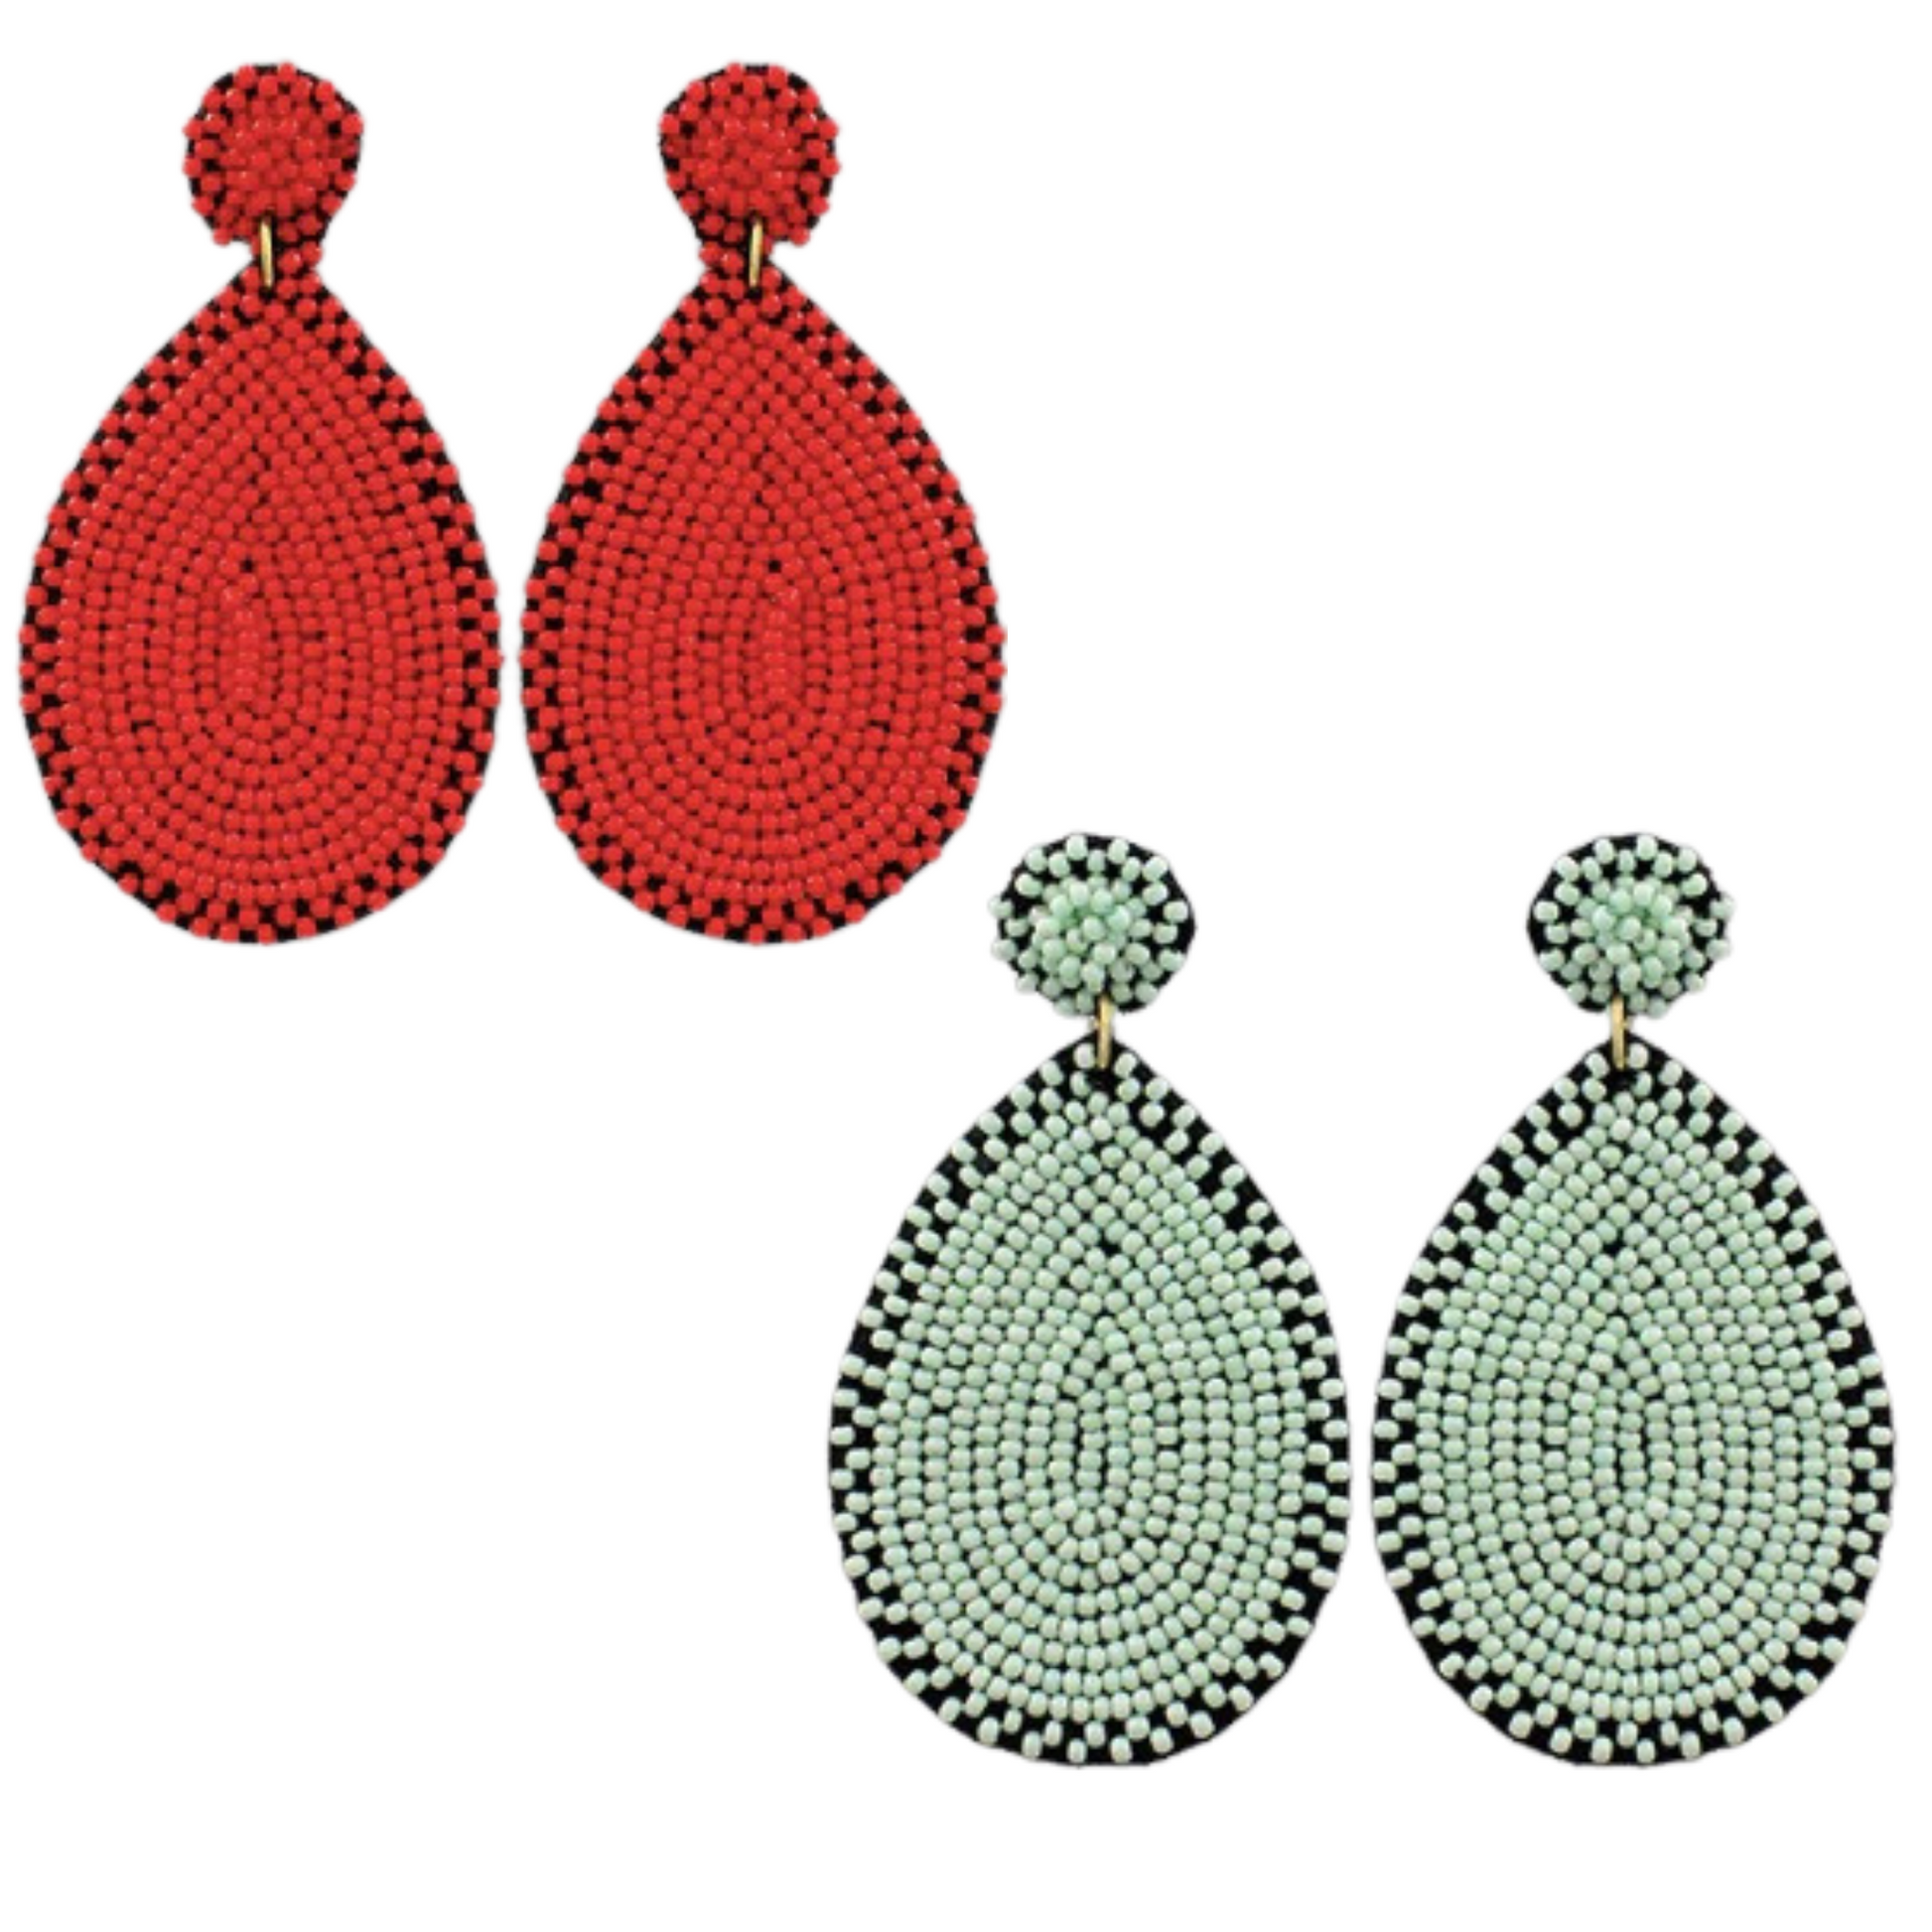 These Beaded Teardrop Earrings are a classic look with a modern twist. Crafted with beads in both sea foam and red, they will spruce up any outfit. An ideal choice for everyday wear and special occasions alike. Available in Red and Seafood colors